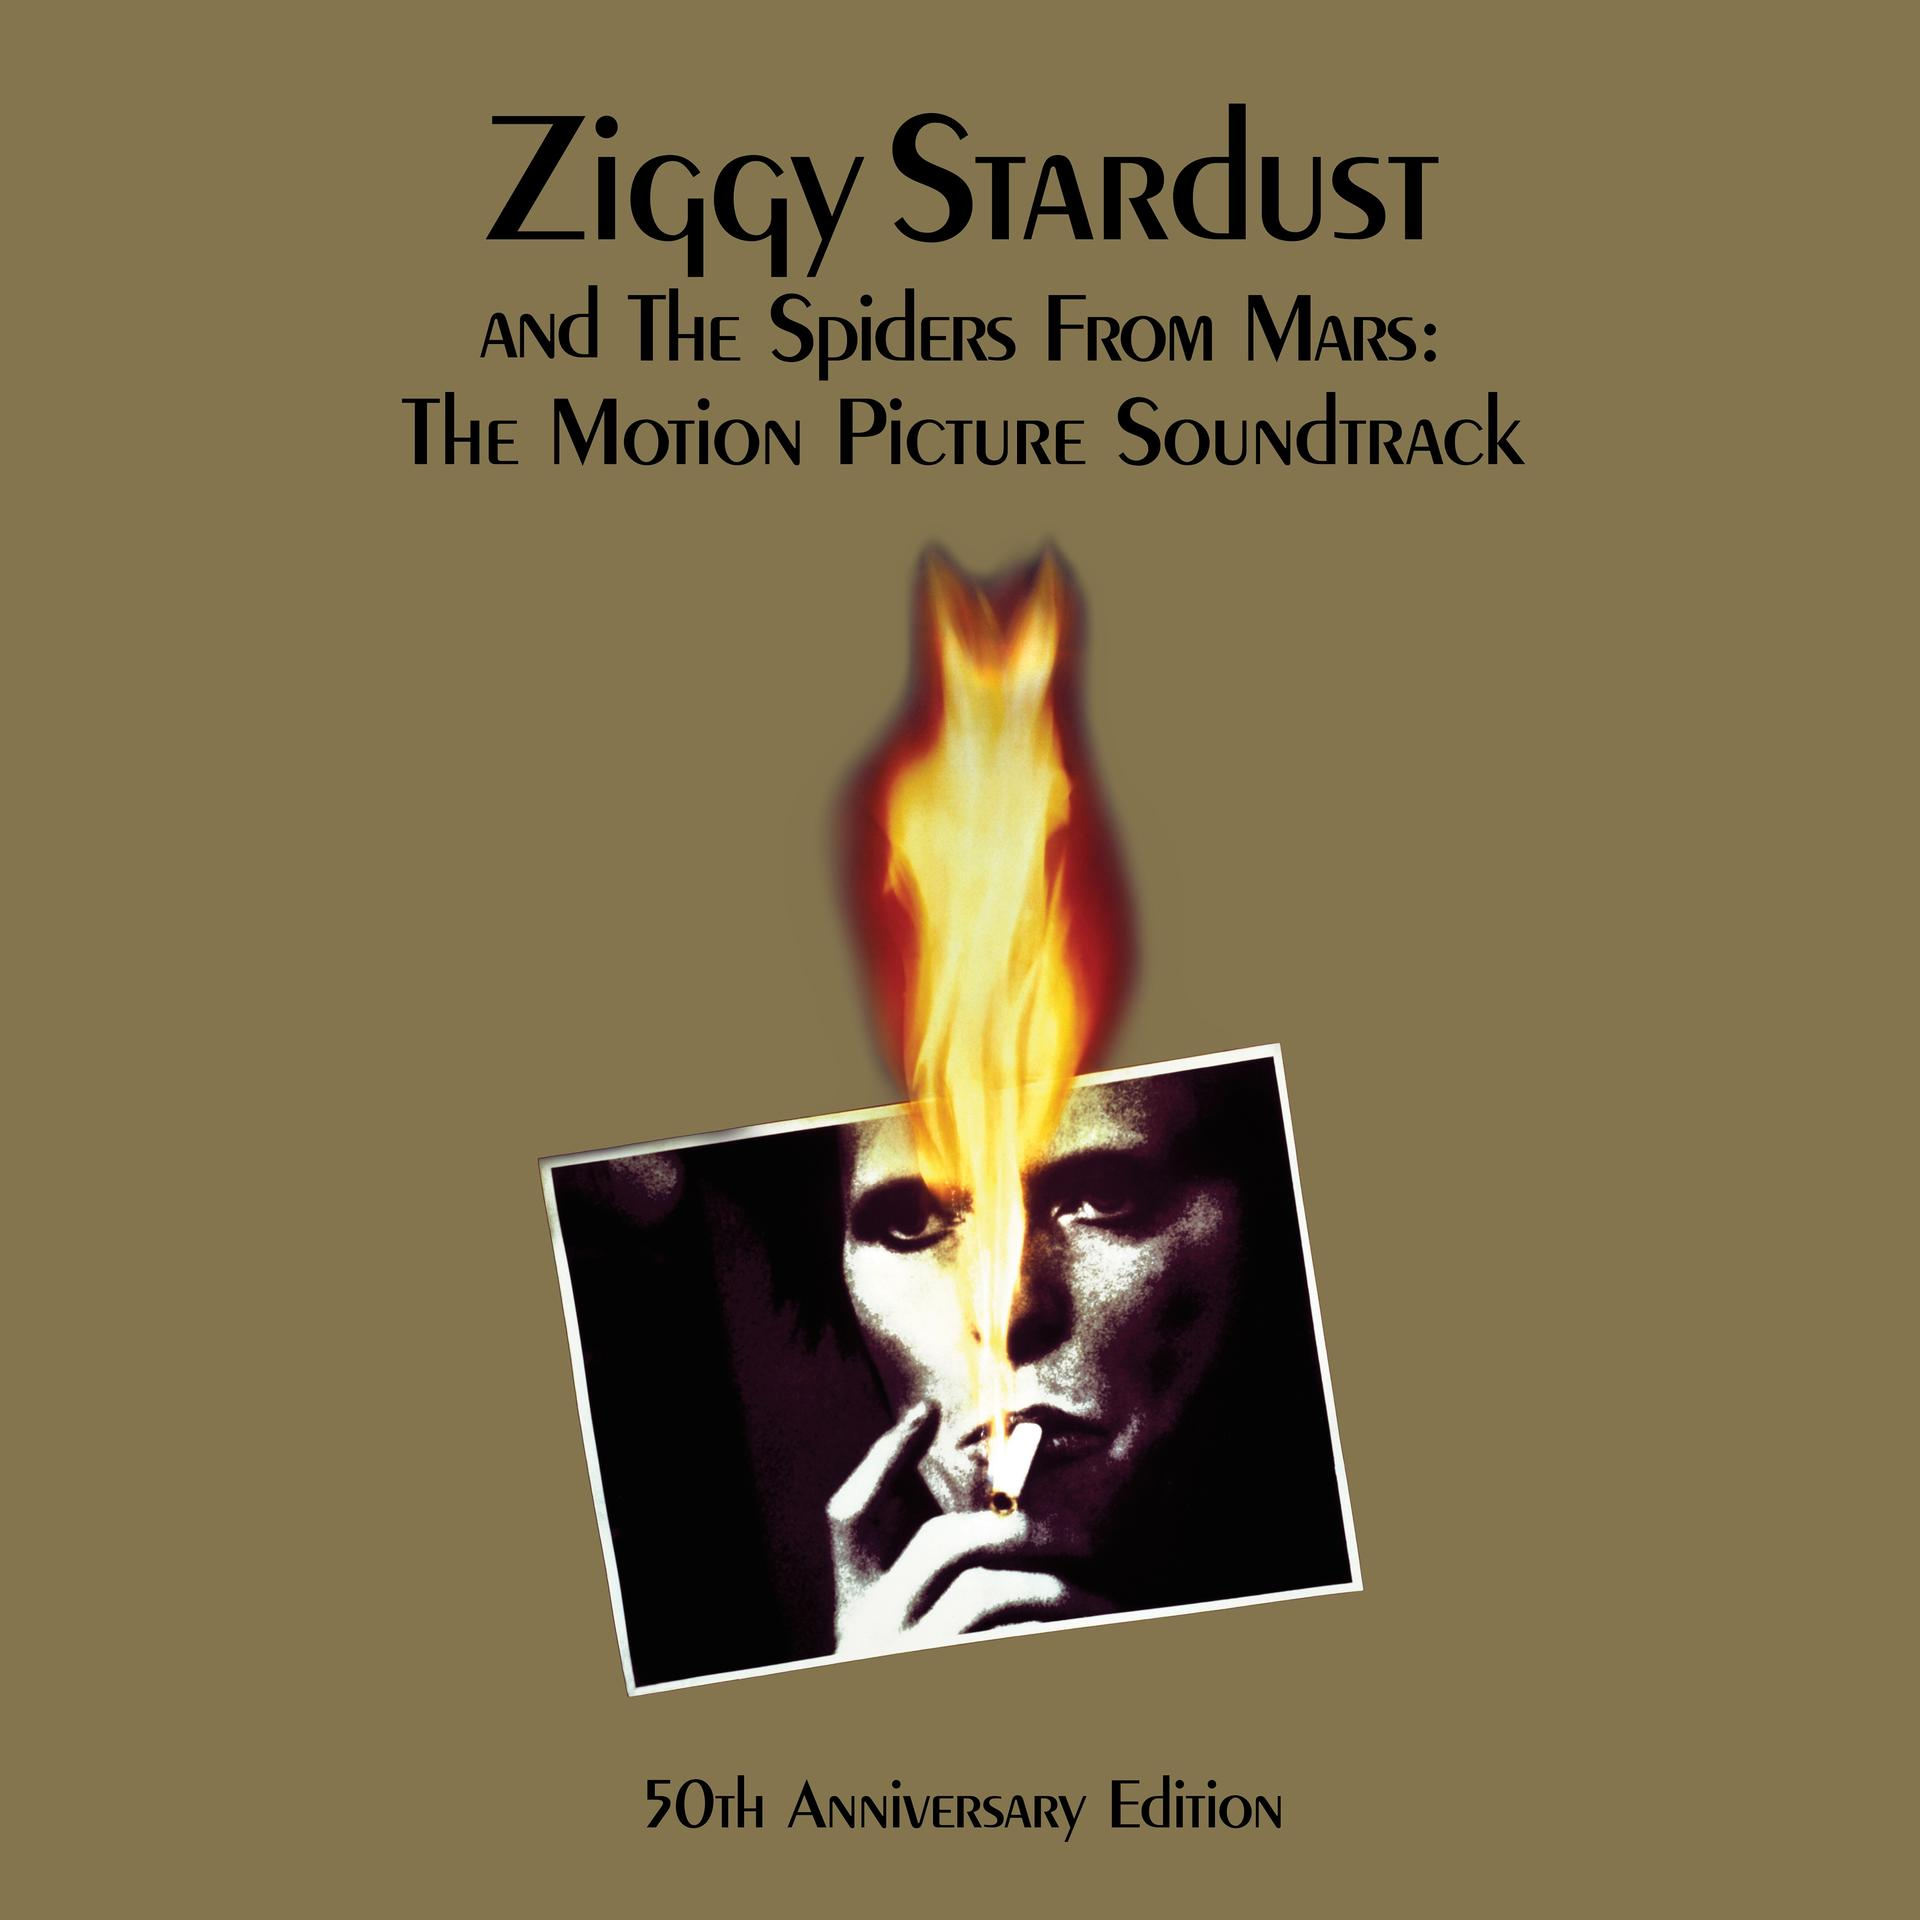 David Bowie Spiders Ziggy The Mars: (Vinyl) Stardust and - From 